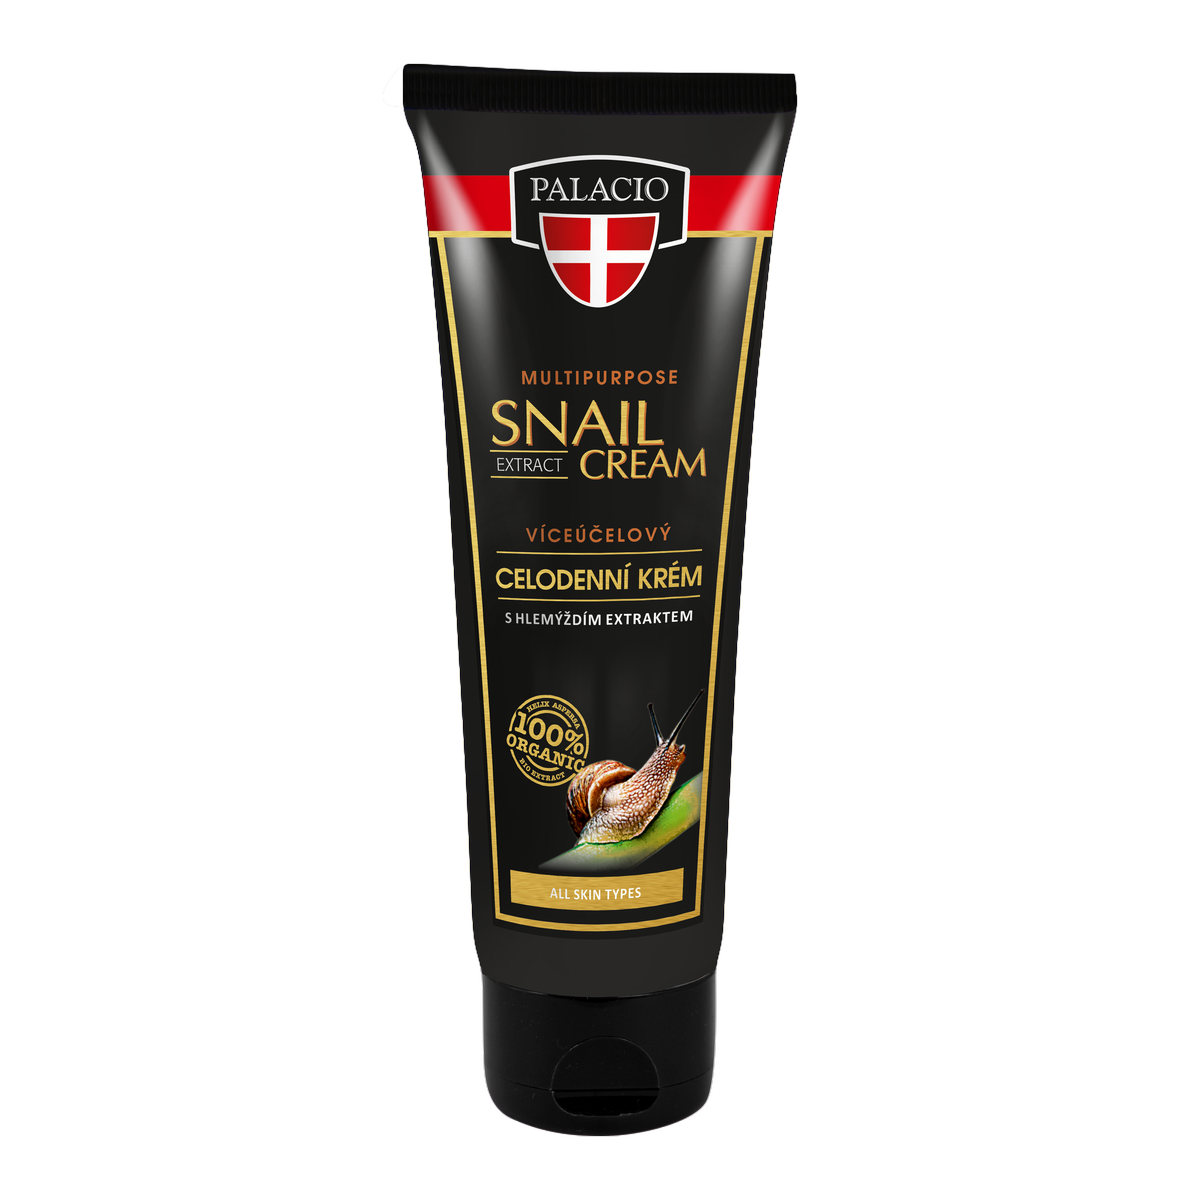 SNAIL EXTRACT Multipurpouse Cream 125ml P1305 ENG WEB 111